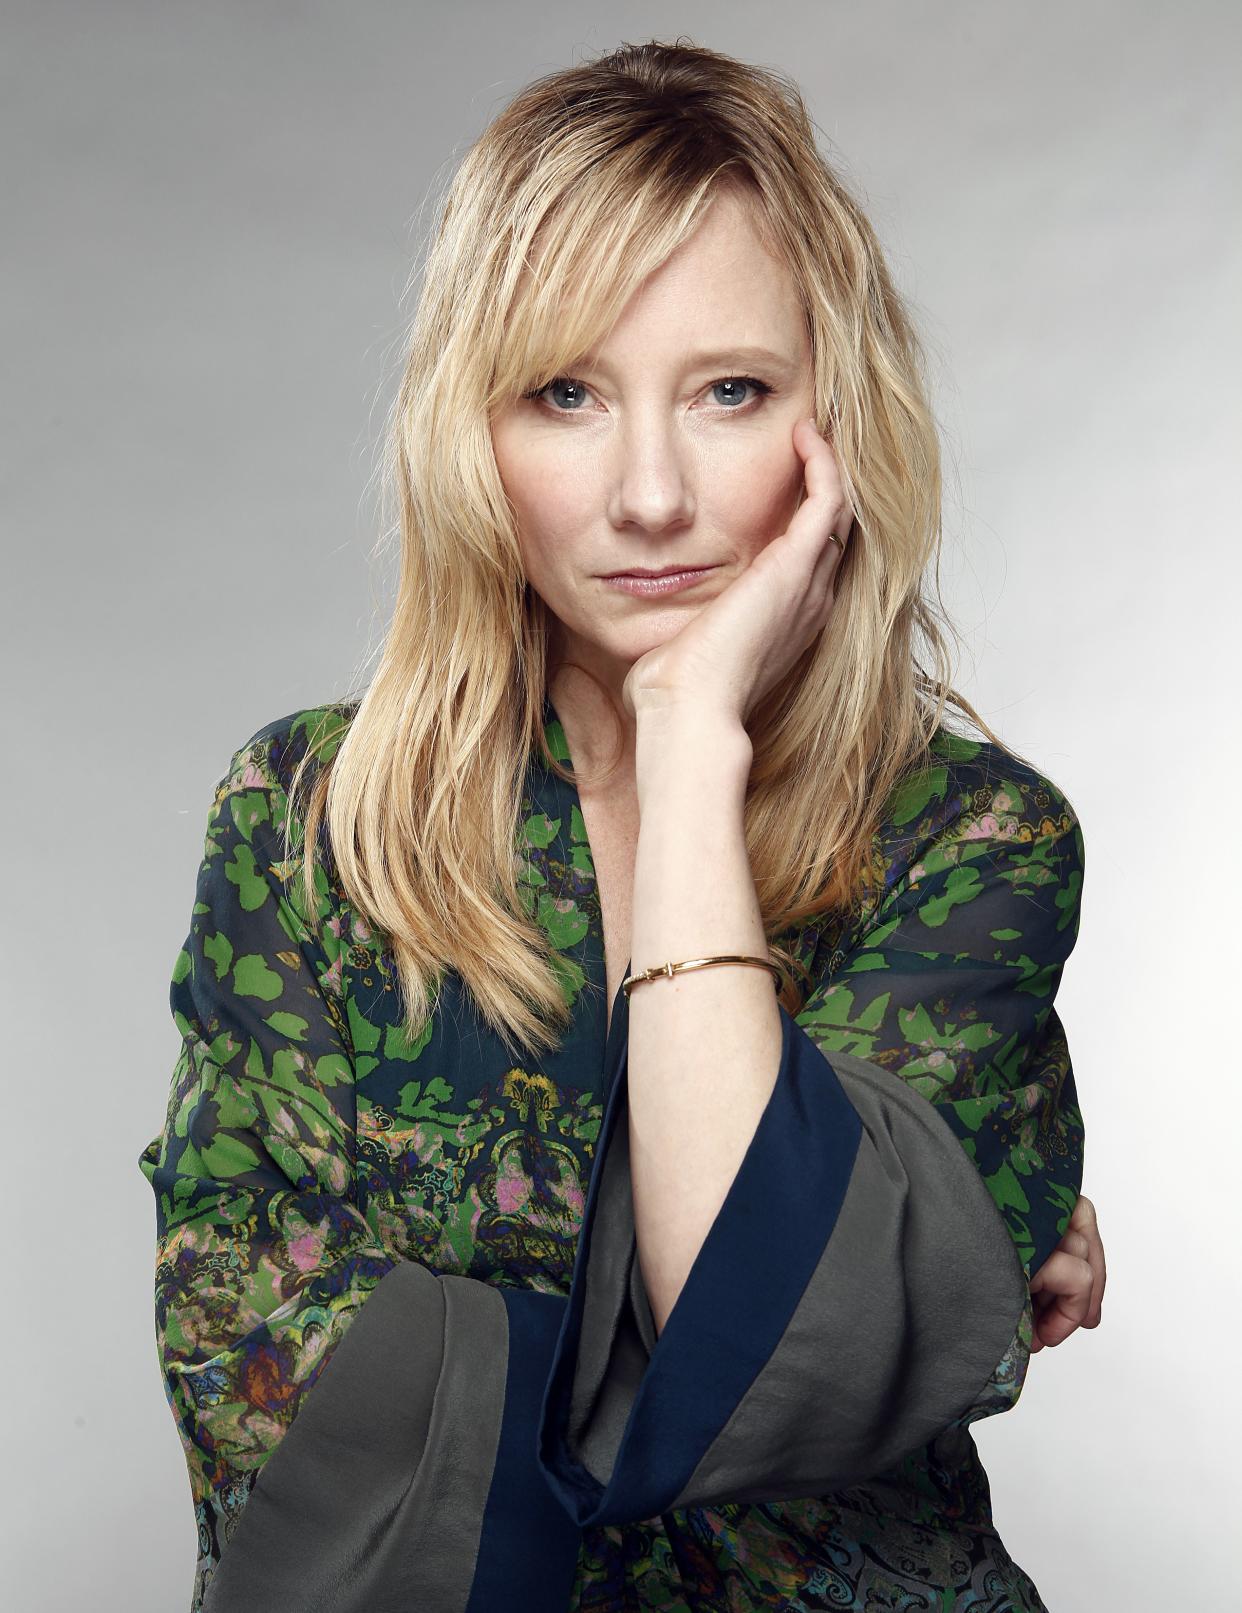 Actress Anne Heche, who first came to prominence on the NBC soap opera “Another World” in the late 1980s before becoming one of the hottest stars in Hollywood in the late 1990s, died Sunday, Aug. 14, 2022, nine days after she was injured in a fiery car crash. She was 53. 